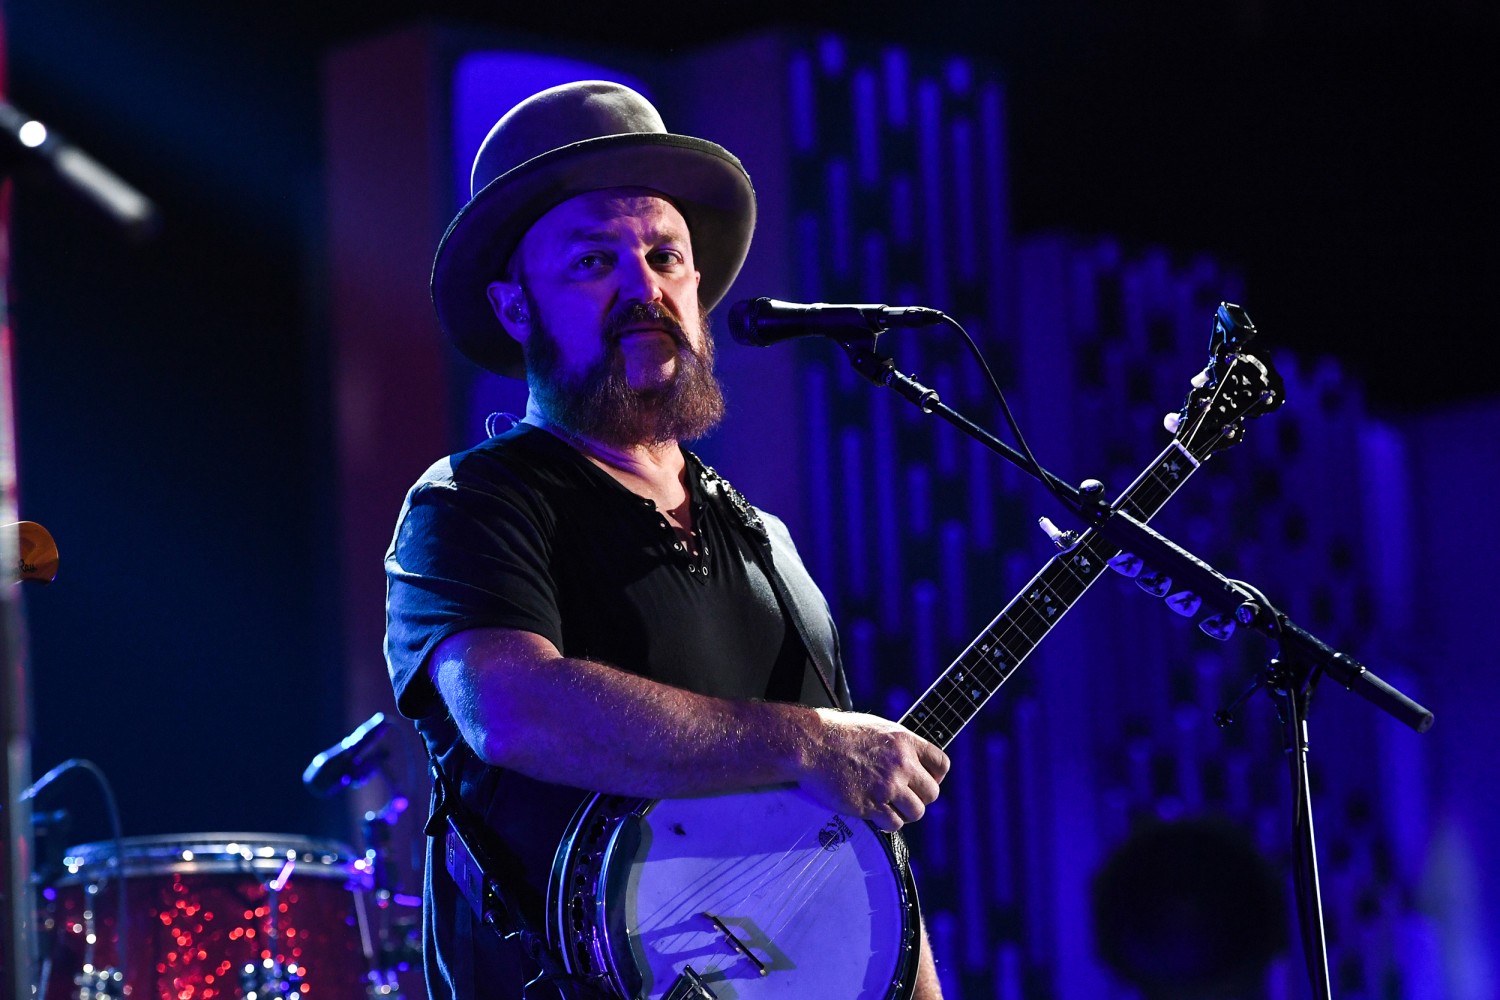 John Driskell Hopkins, founding member of Zac Brown Band, has ALS, he says in video